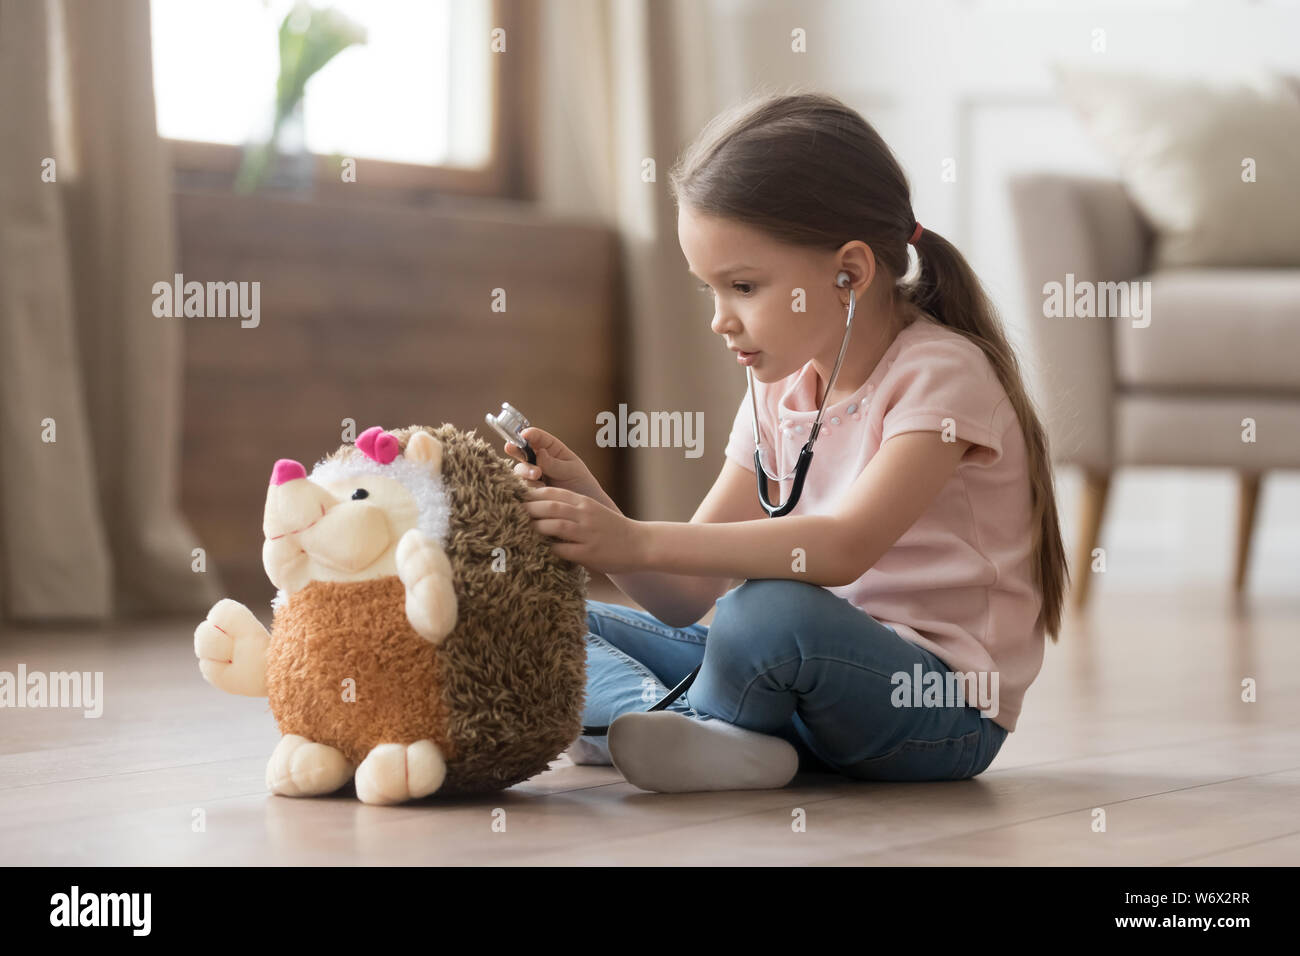 Little girl play doctor and treats hedgehog stuffed toy Stock Photo